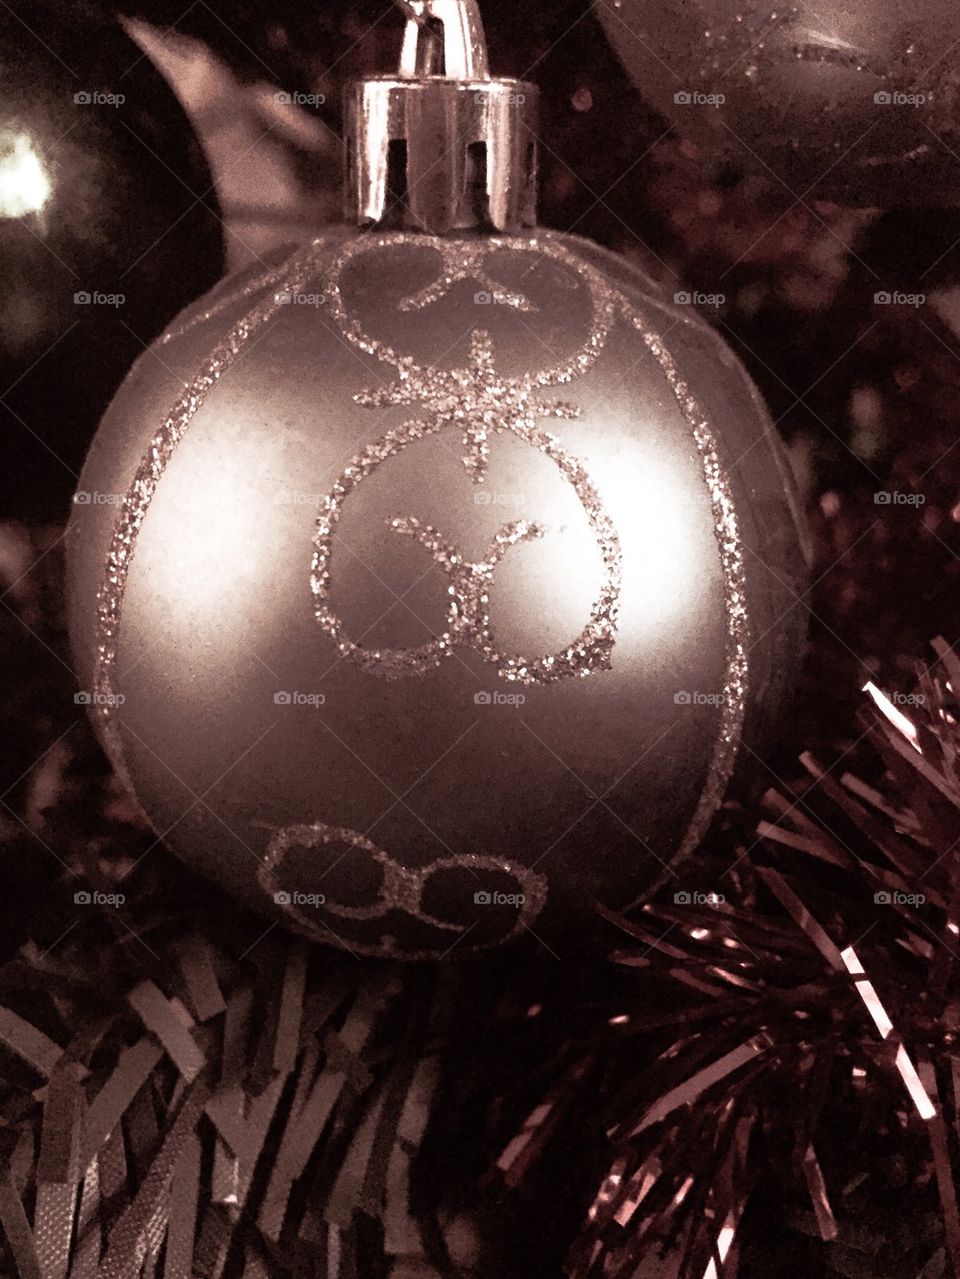 Baubles on the tree